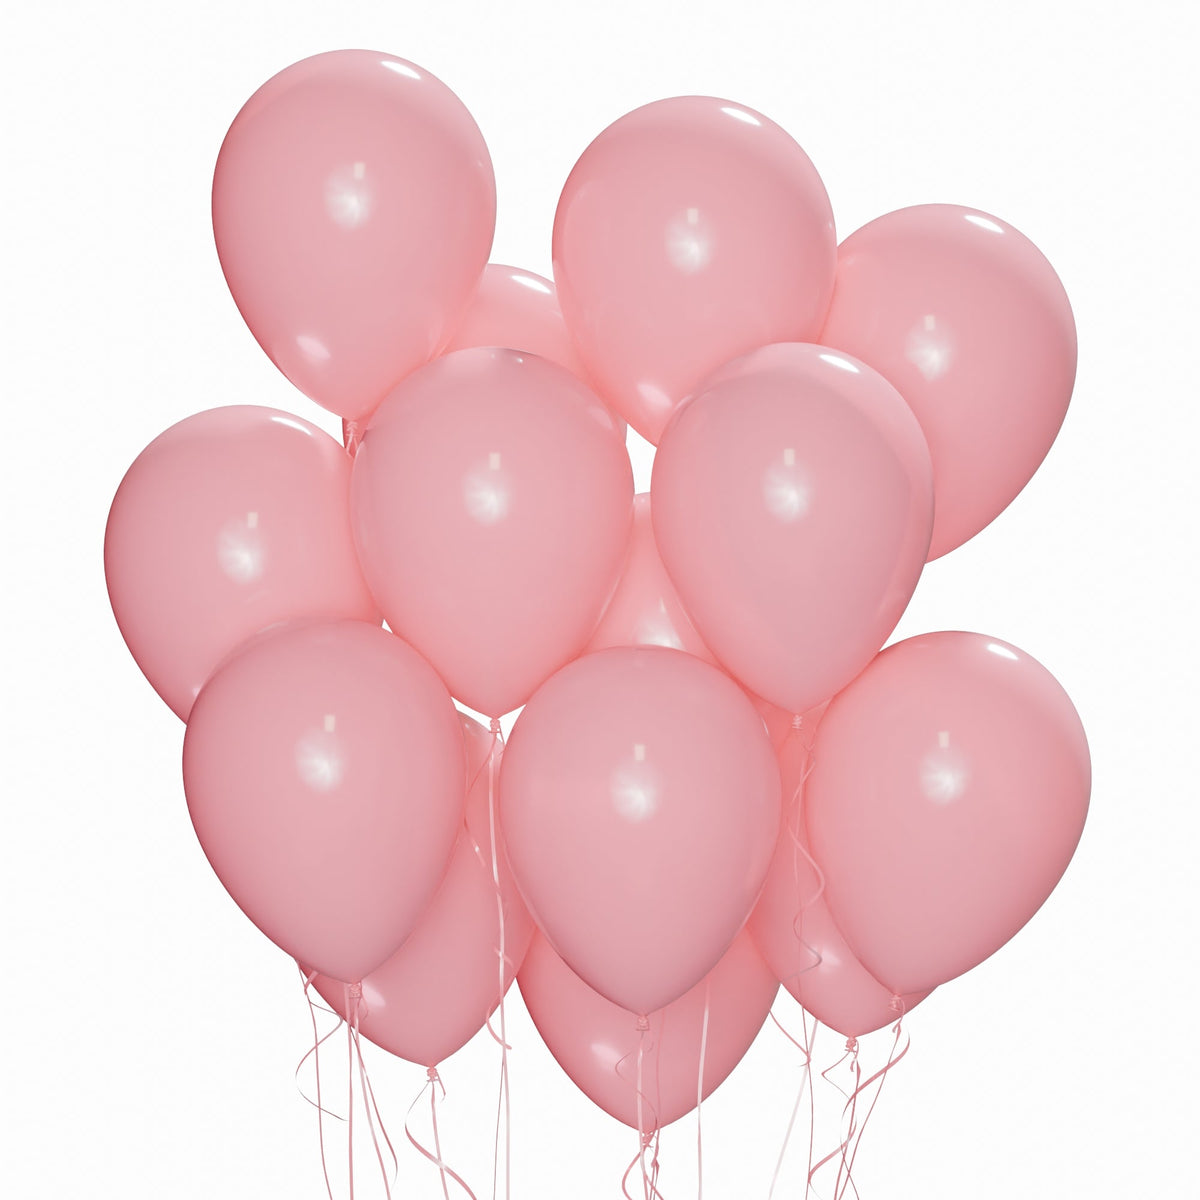 WIDE OCEAN INTERNATIONAL TRADE BEIJING CO., LTD Balloons Baby Pink Latex Balloon 12 Inches, 15 Count 810064197642